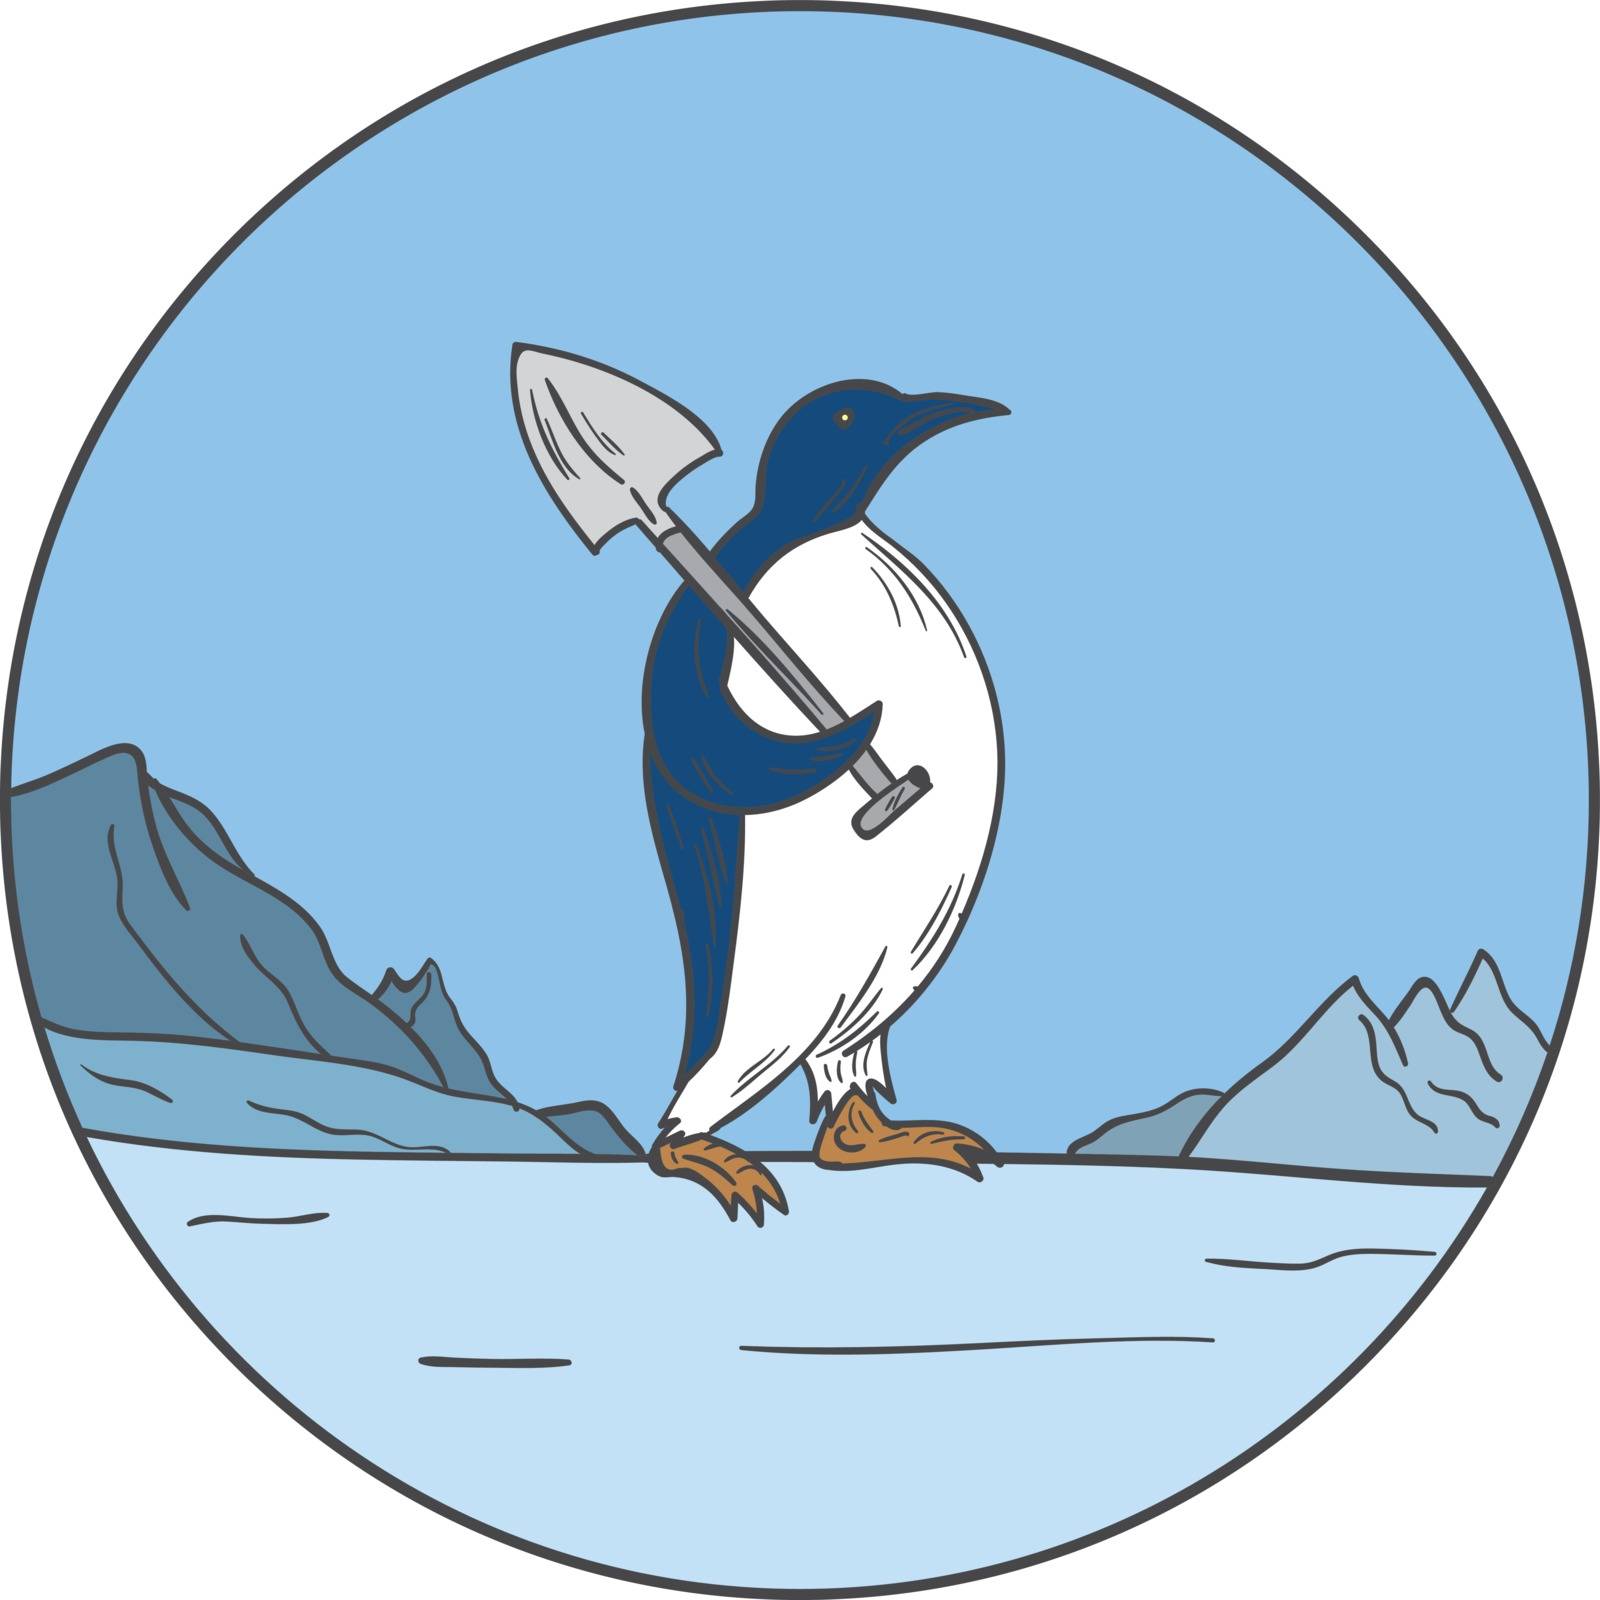 Mono line style illustration of an emperor penguin,Aptenodytes forsteri, a penguin species endemic to Antarctica carrying a shovel and walking on ice with snow mountains in background set inside circle. 